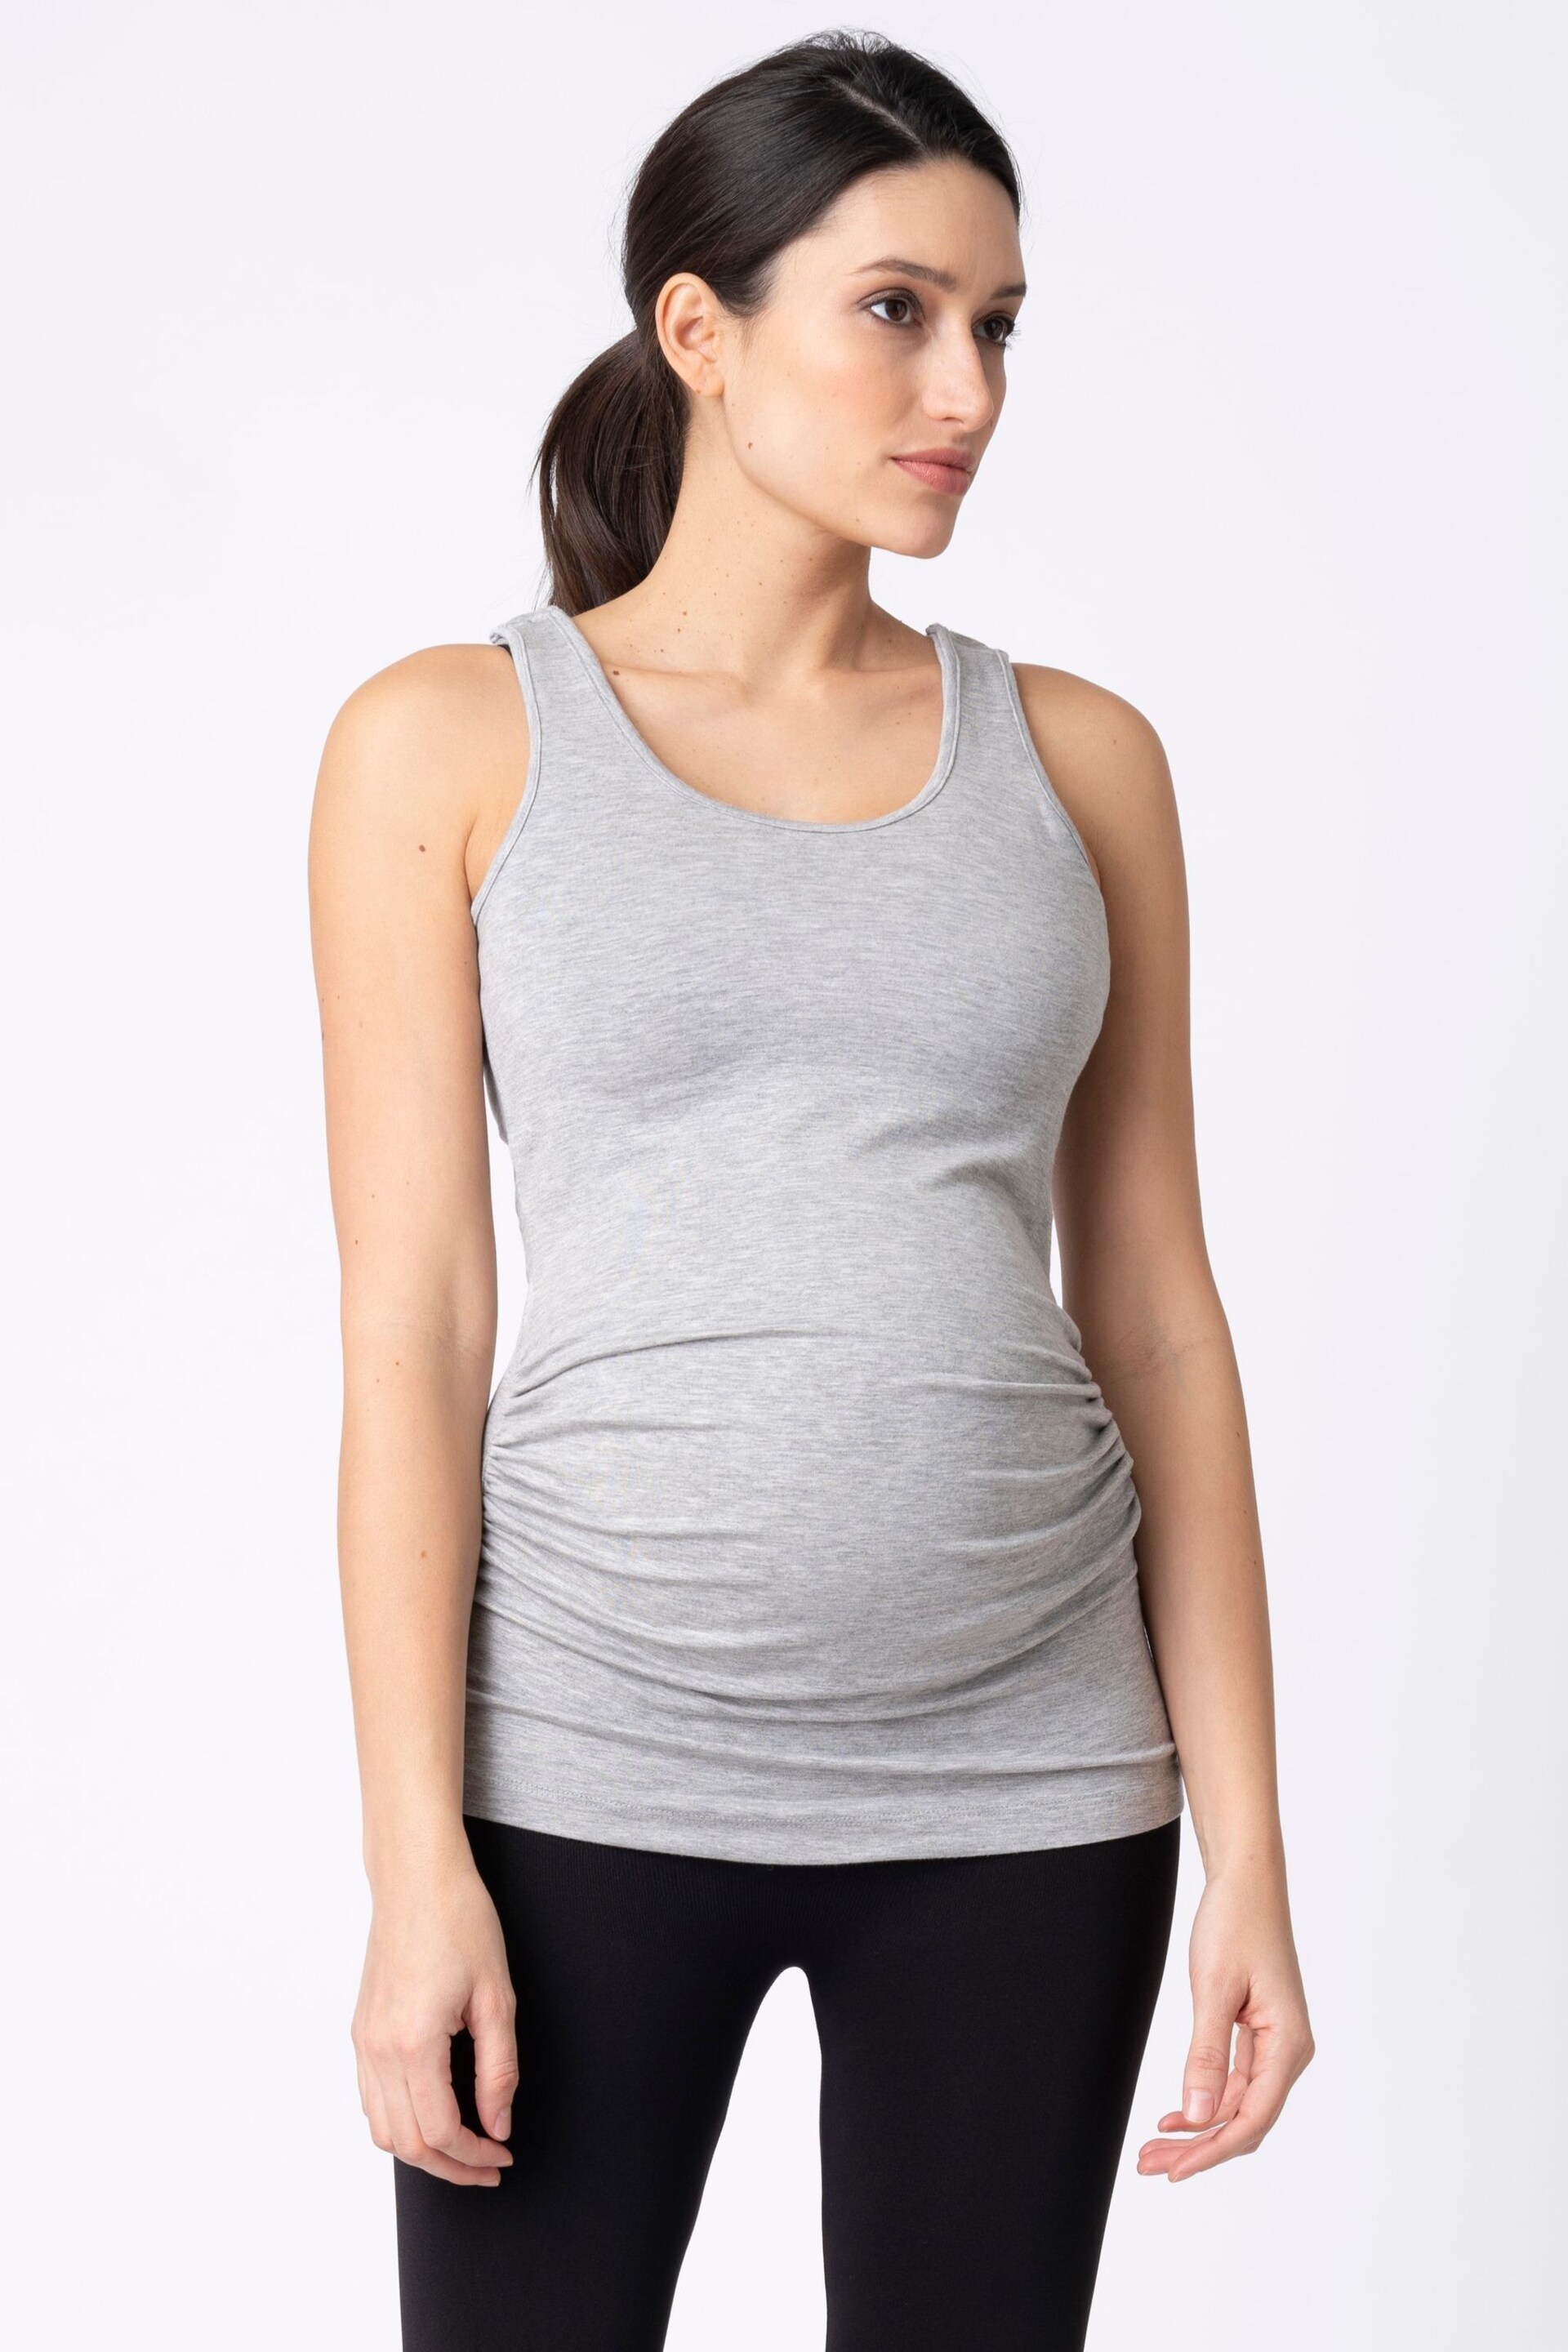 Seraphine Blue Maternity And Nursing Tops – Twin Pack - Image 3 of 12